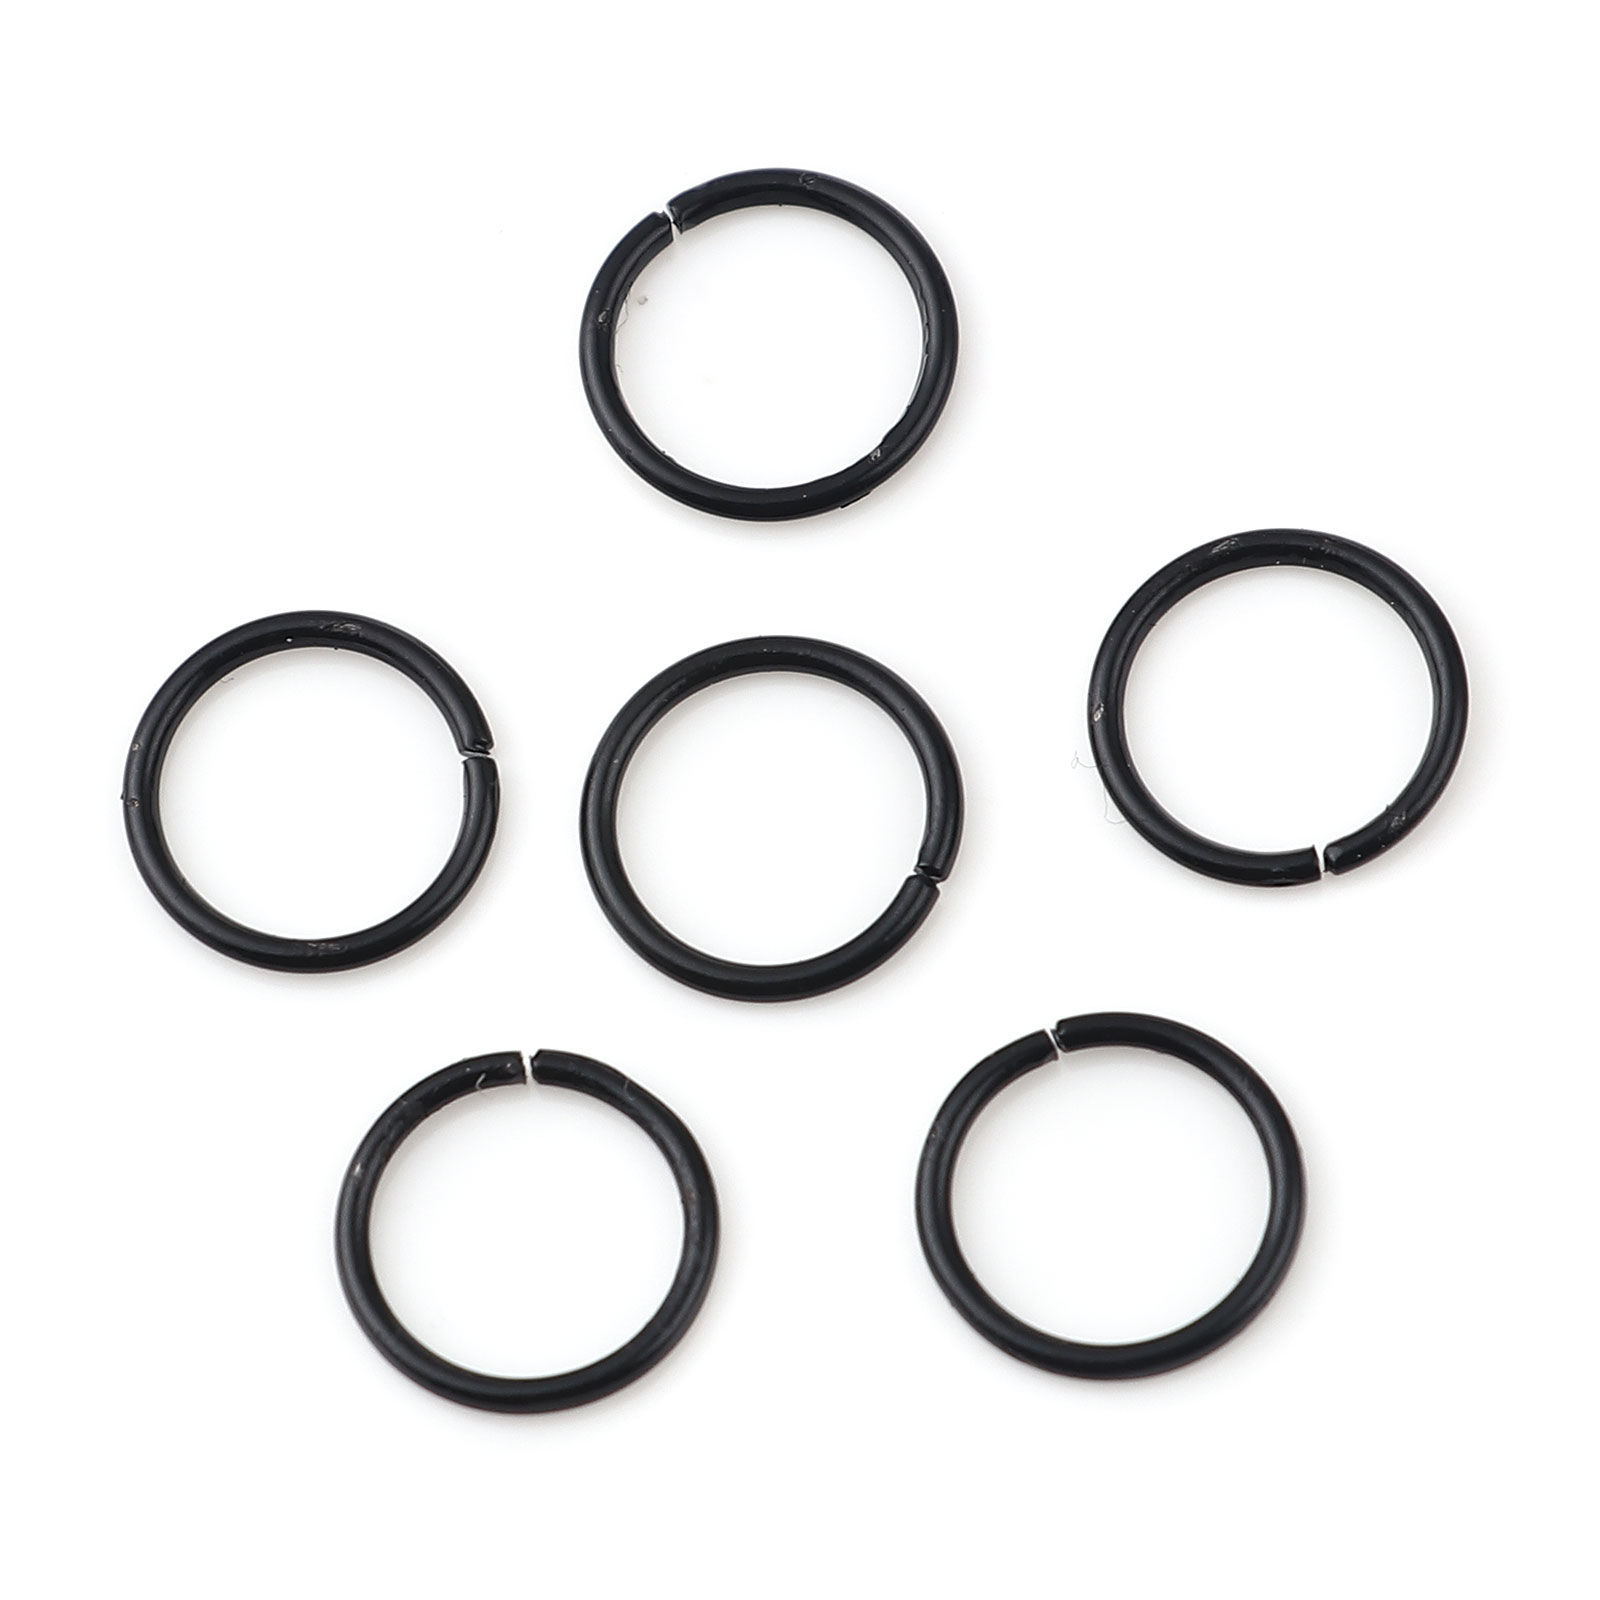 Picture of 0.7mm Iron Based Alloy Open Jump Rings Findings Circle Ring Black 5mm Dia, 200 PCs